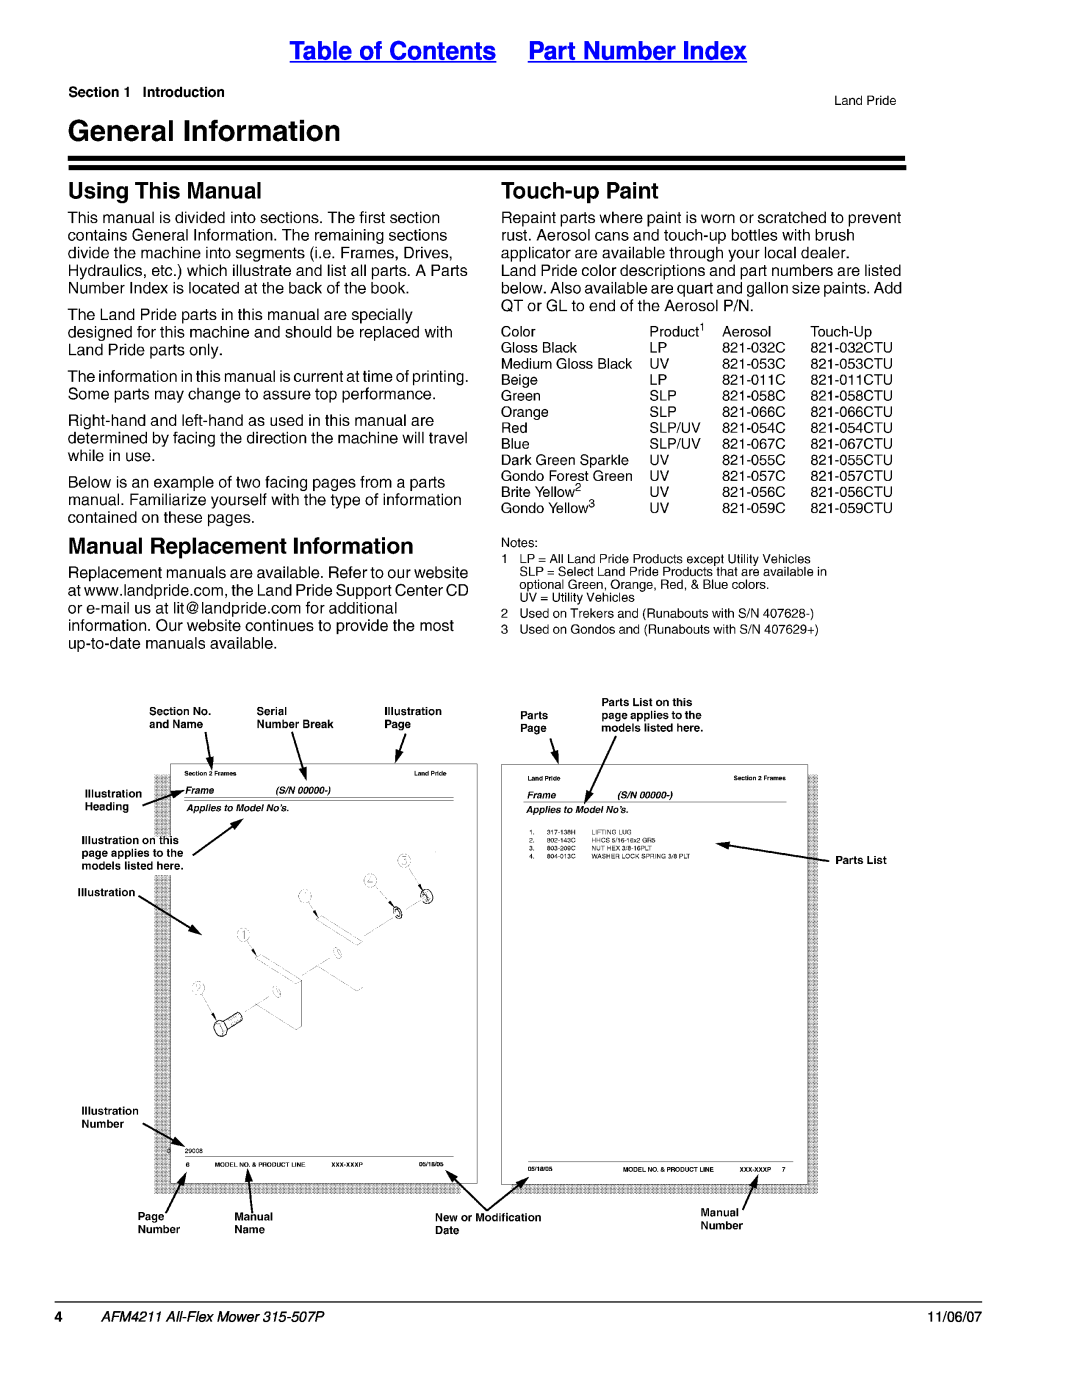 Land Pride All-Flex Mower manual Table of Contents Part Number Index, AFM4211 All-FlexMower 315-507P, 11/06/07 